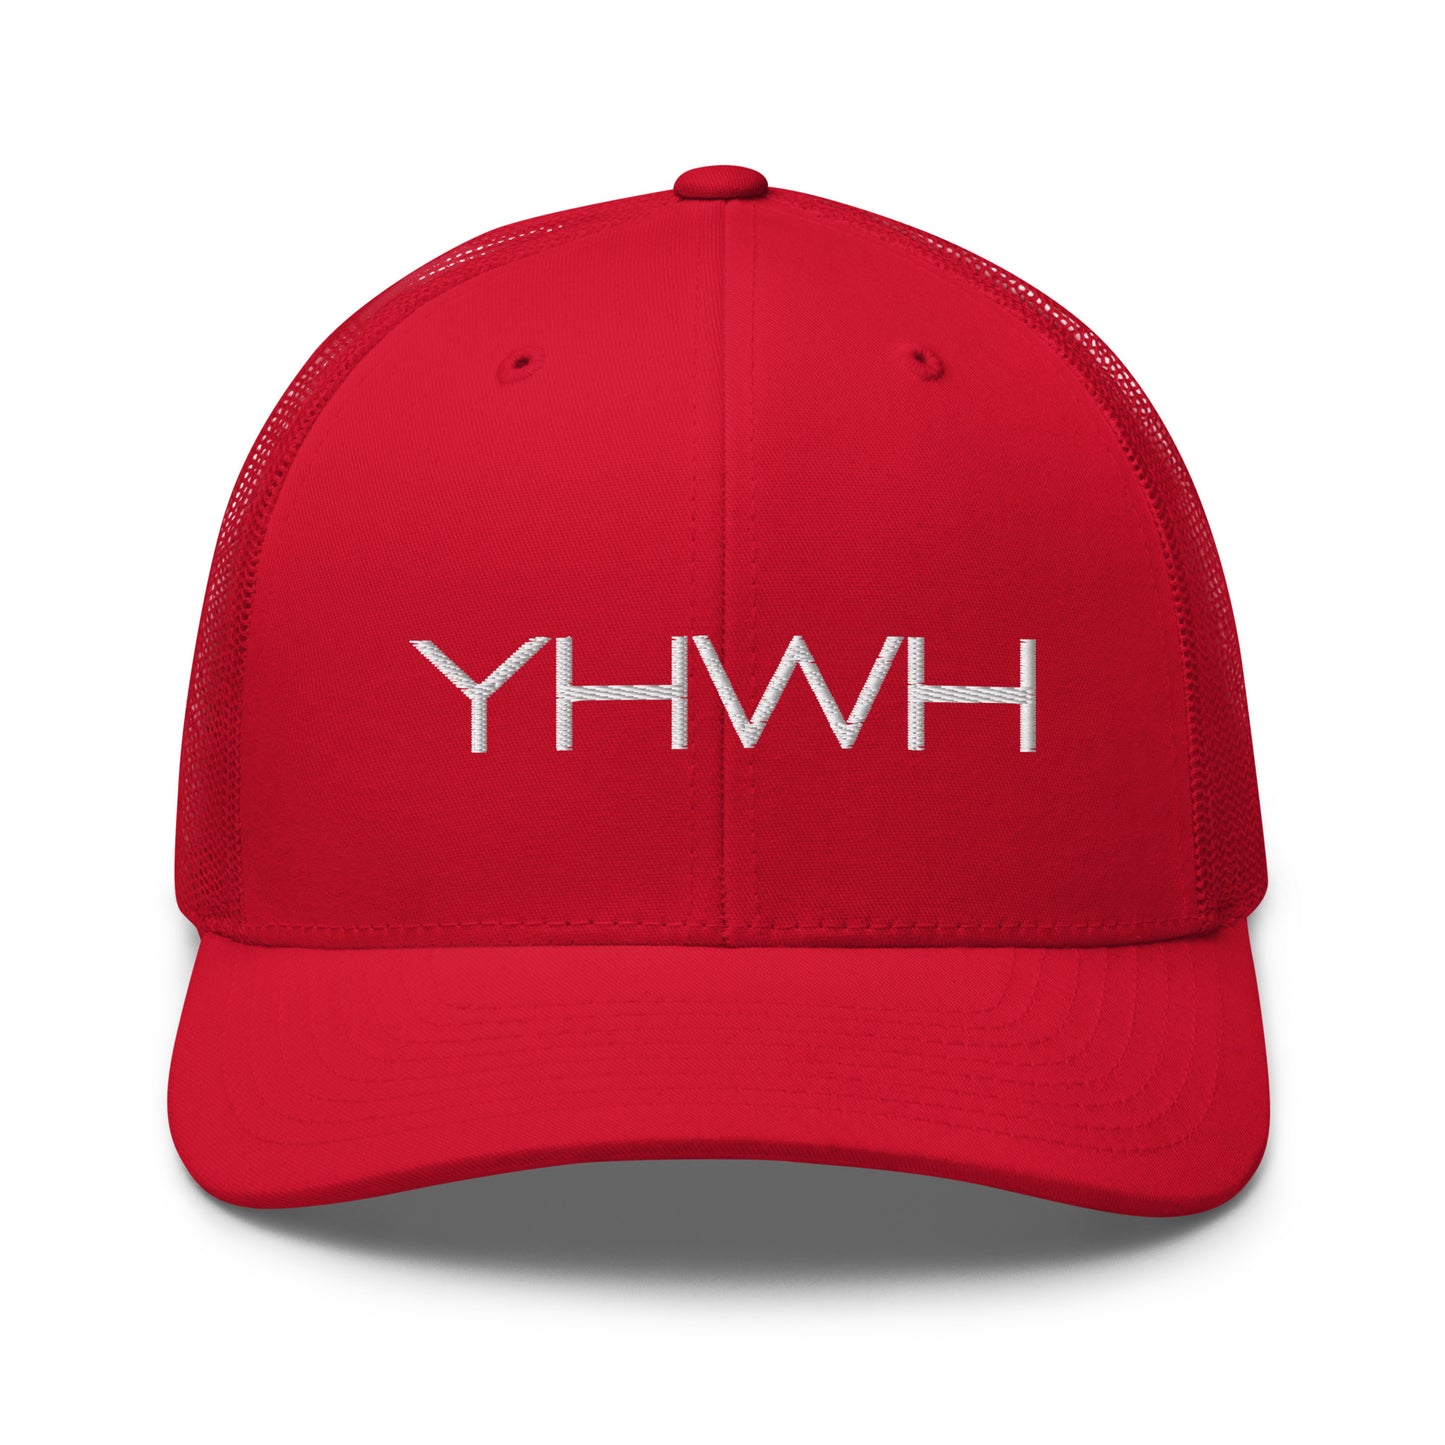 YHWH Embroidery Trucker Cap